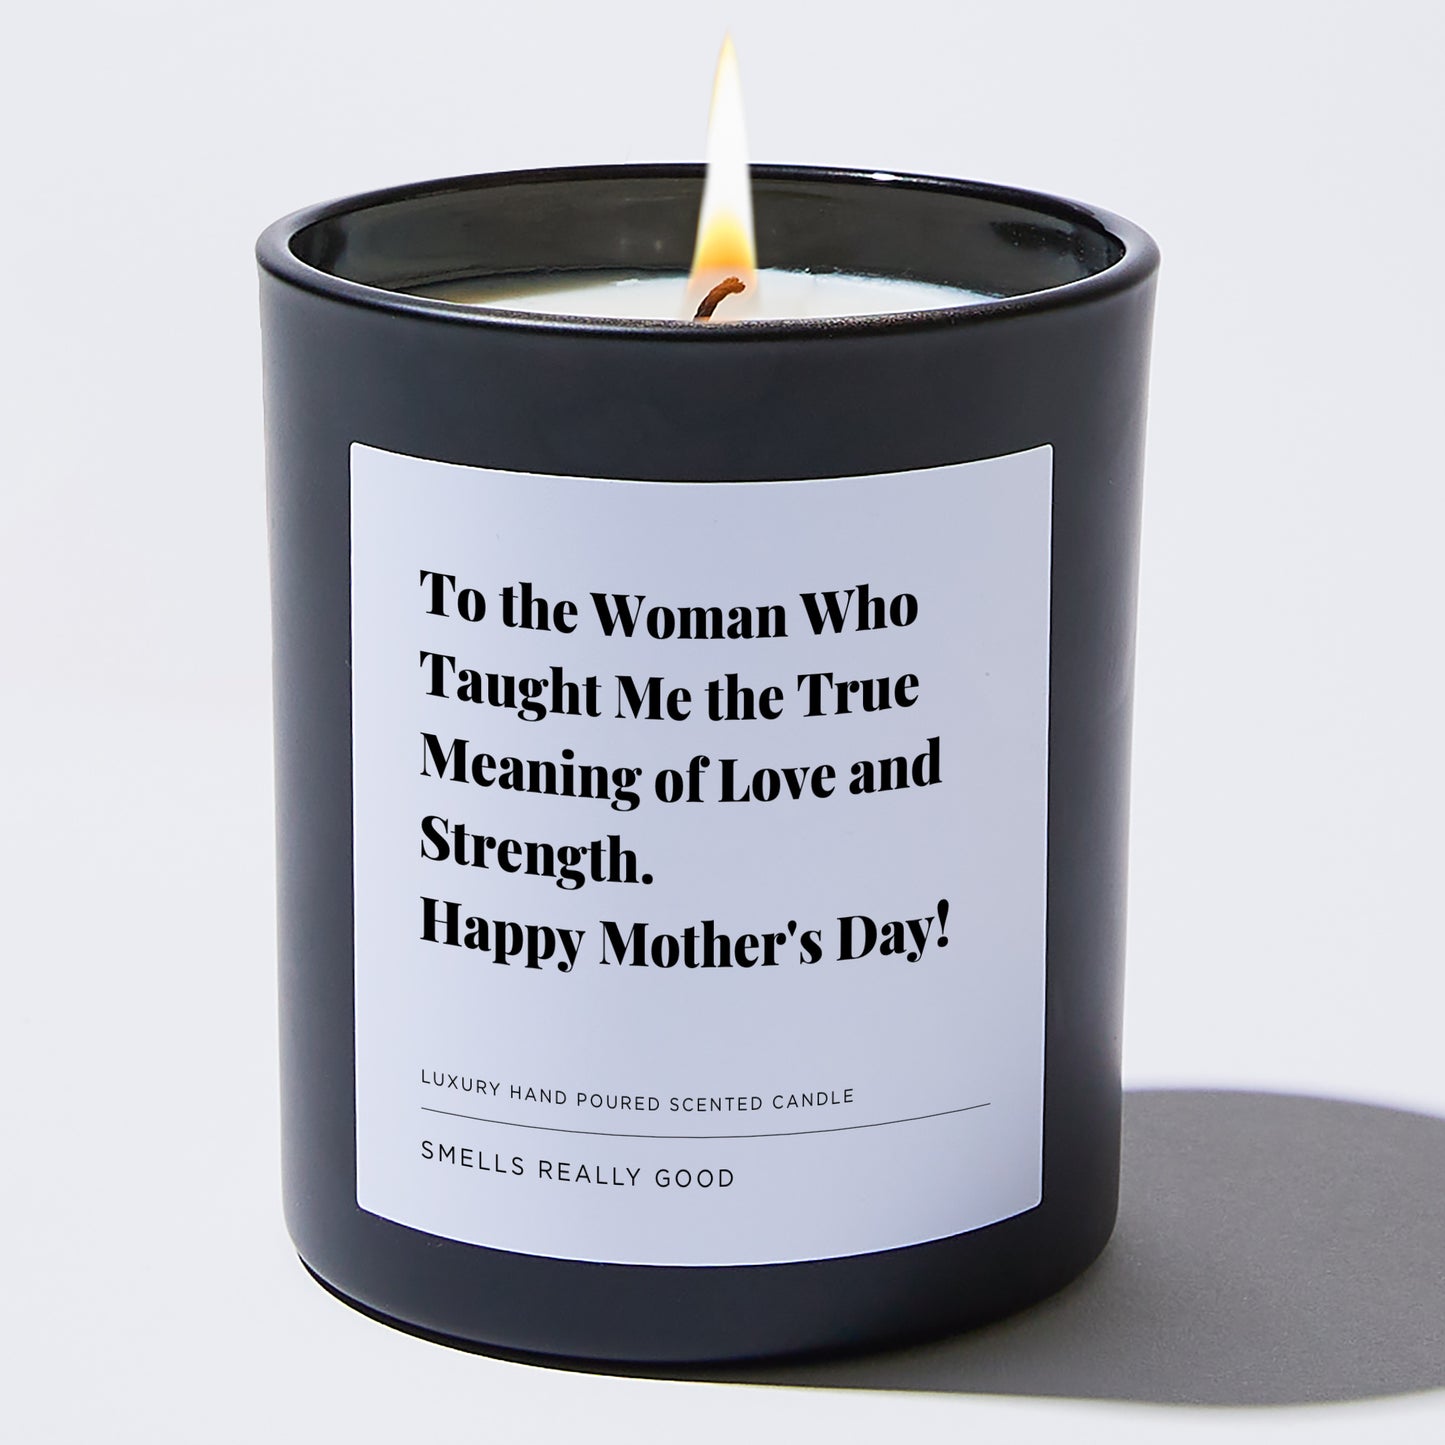 Gift for Mom - To the woman who taught me the true meaning of love and strength. Happy Mother's Day! - Candle